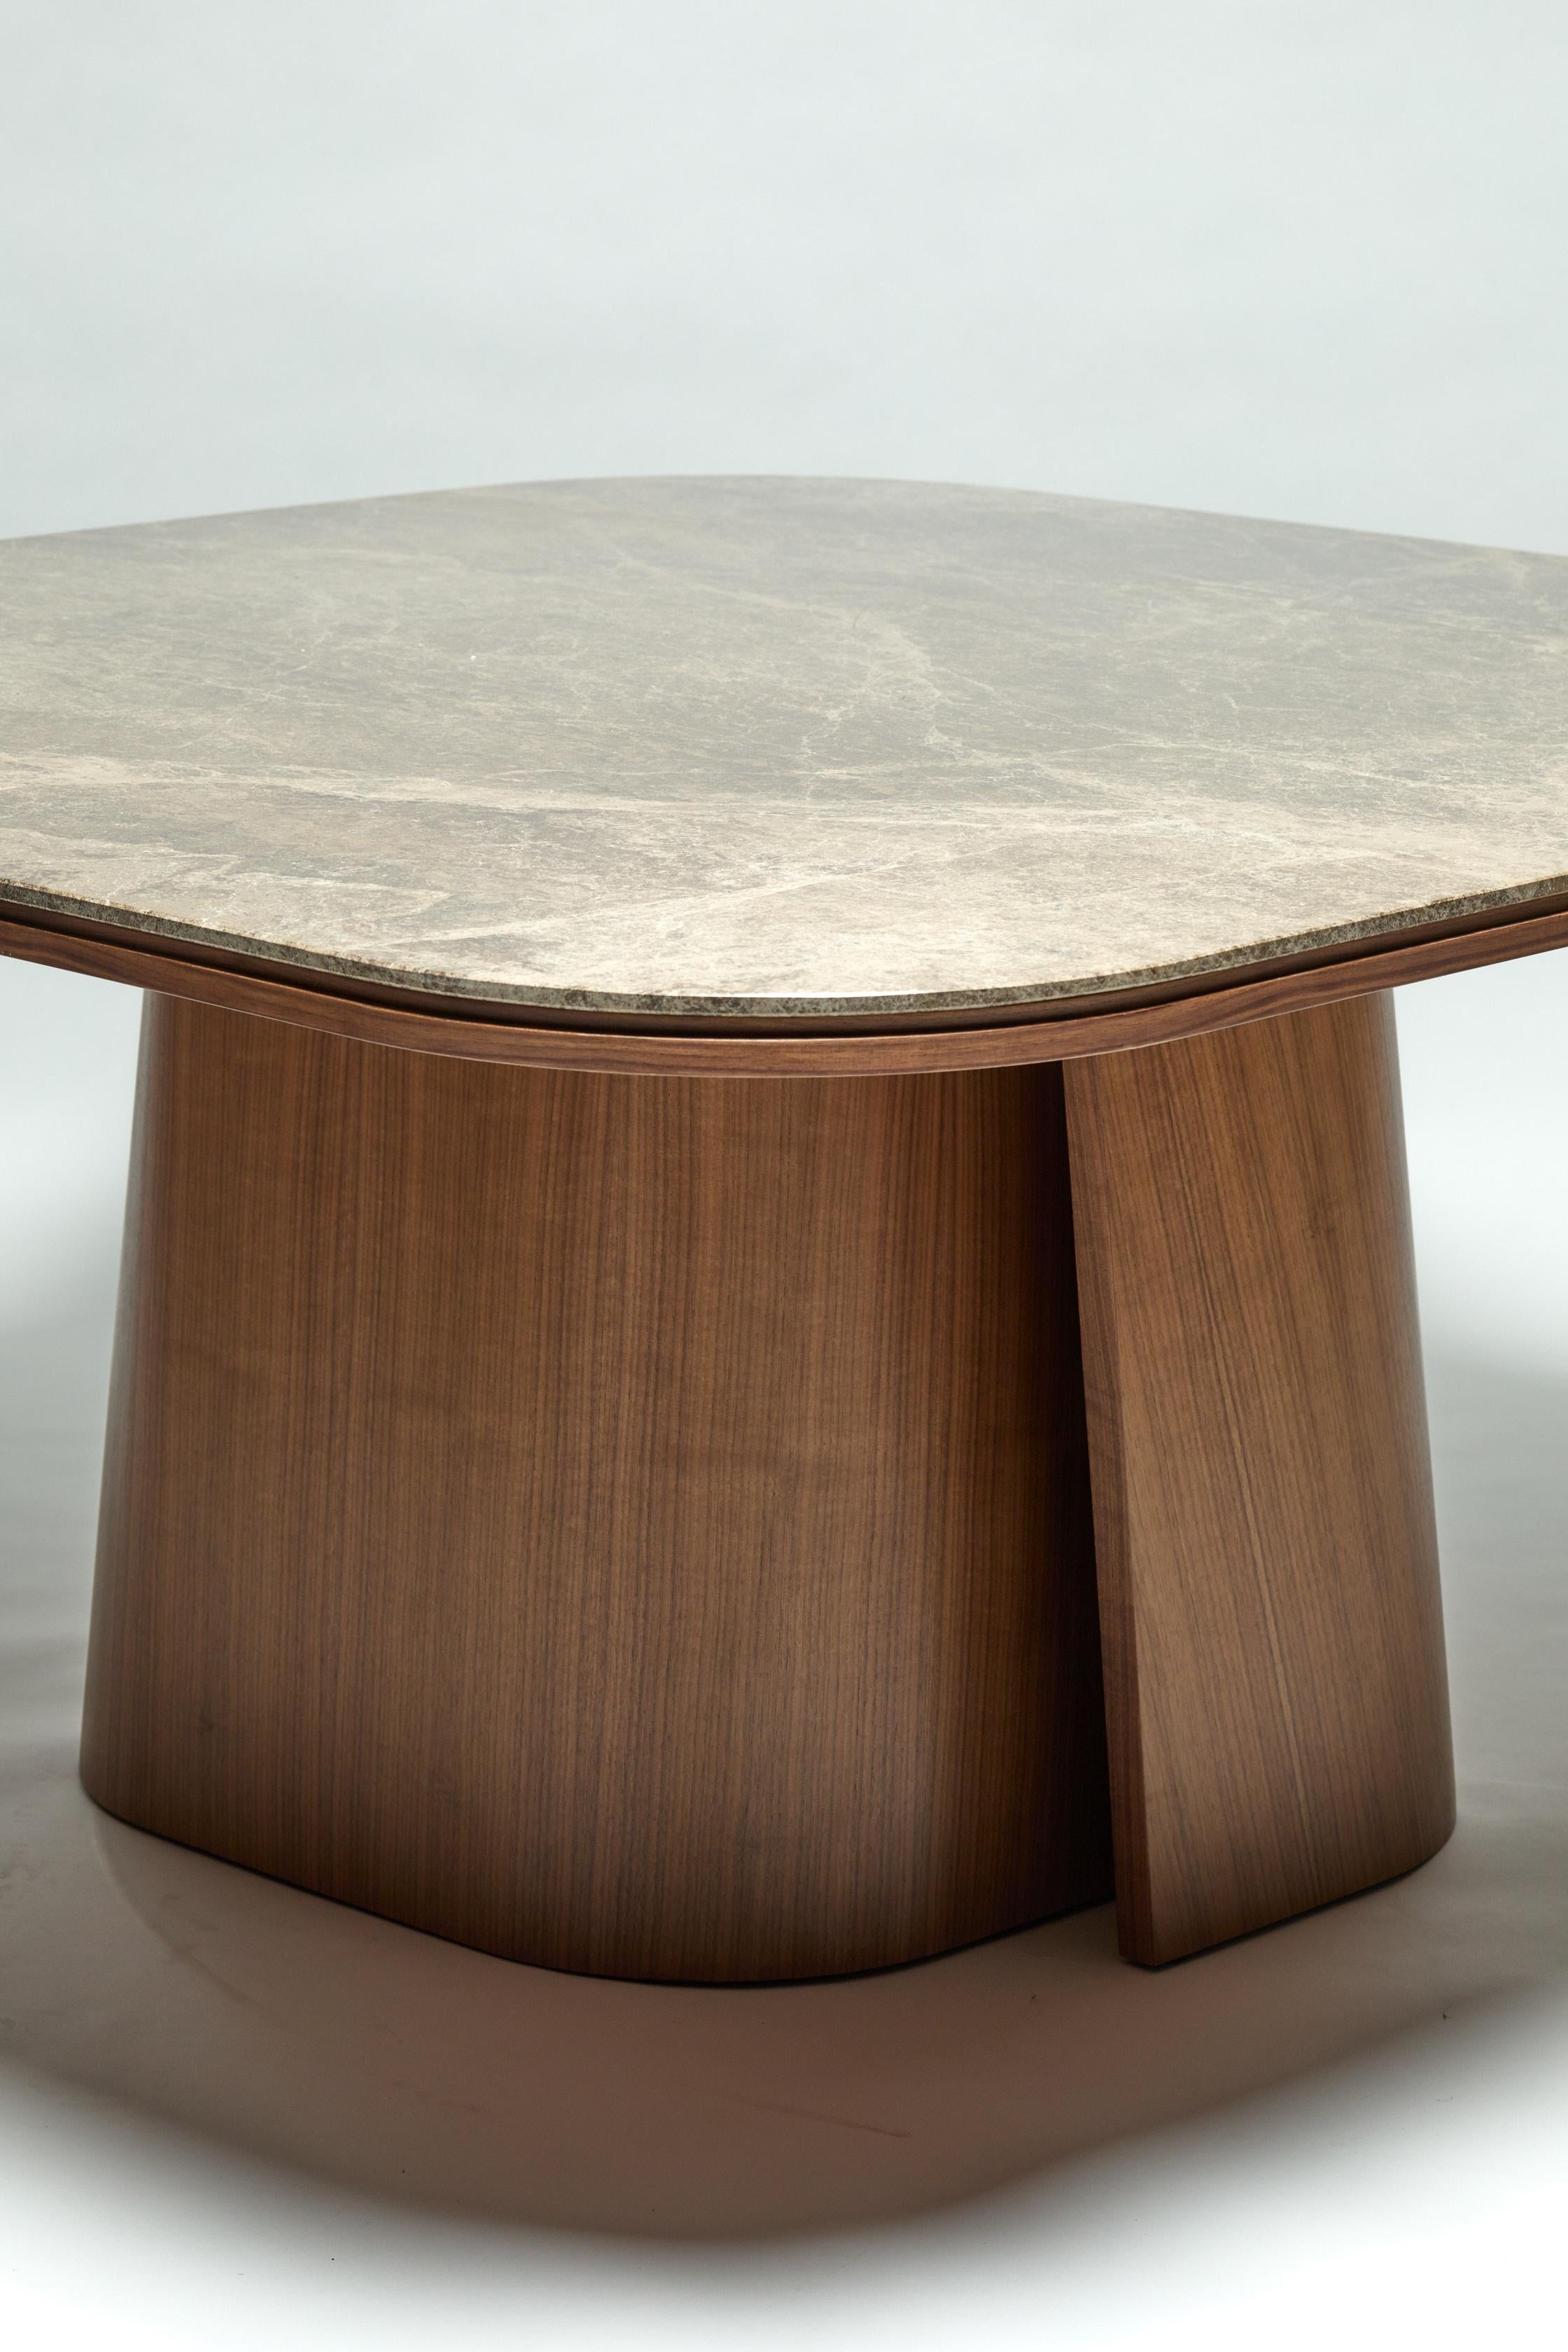 Modern Dining Table, OOMA, by Reda Amalou Design, 2020, Emperador Marble, 140 cm For Sale